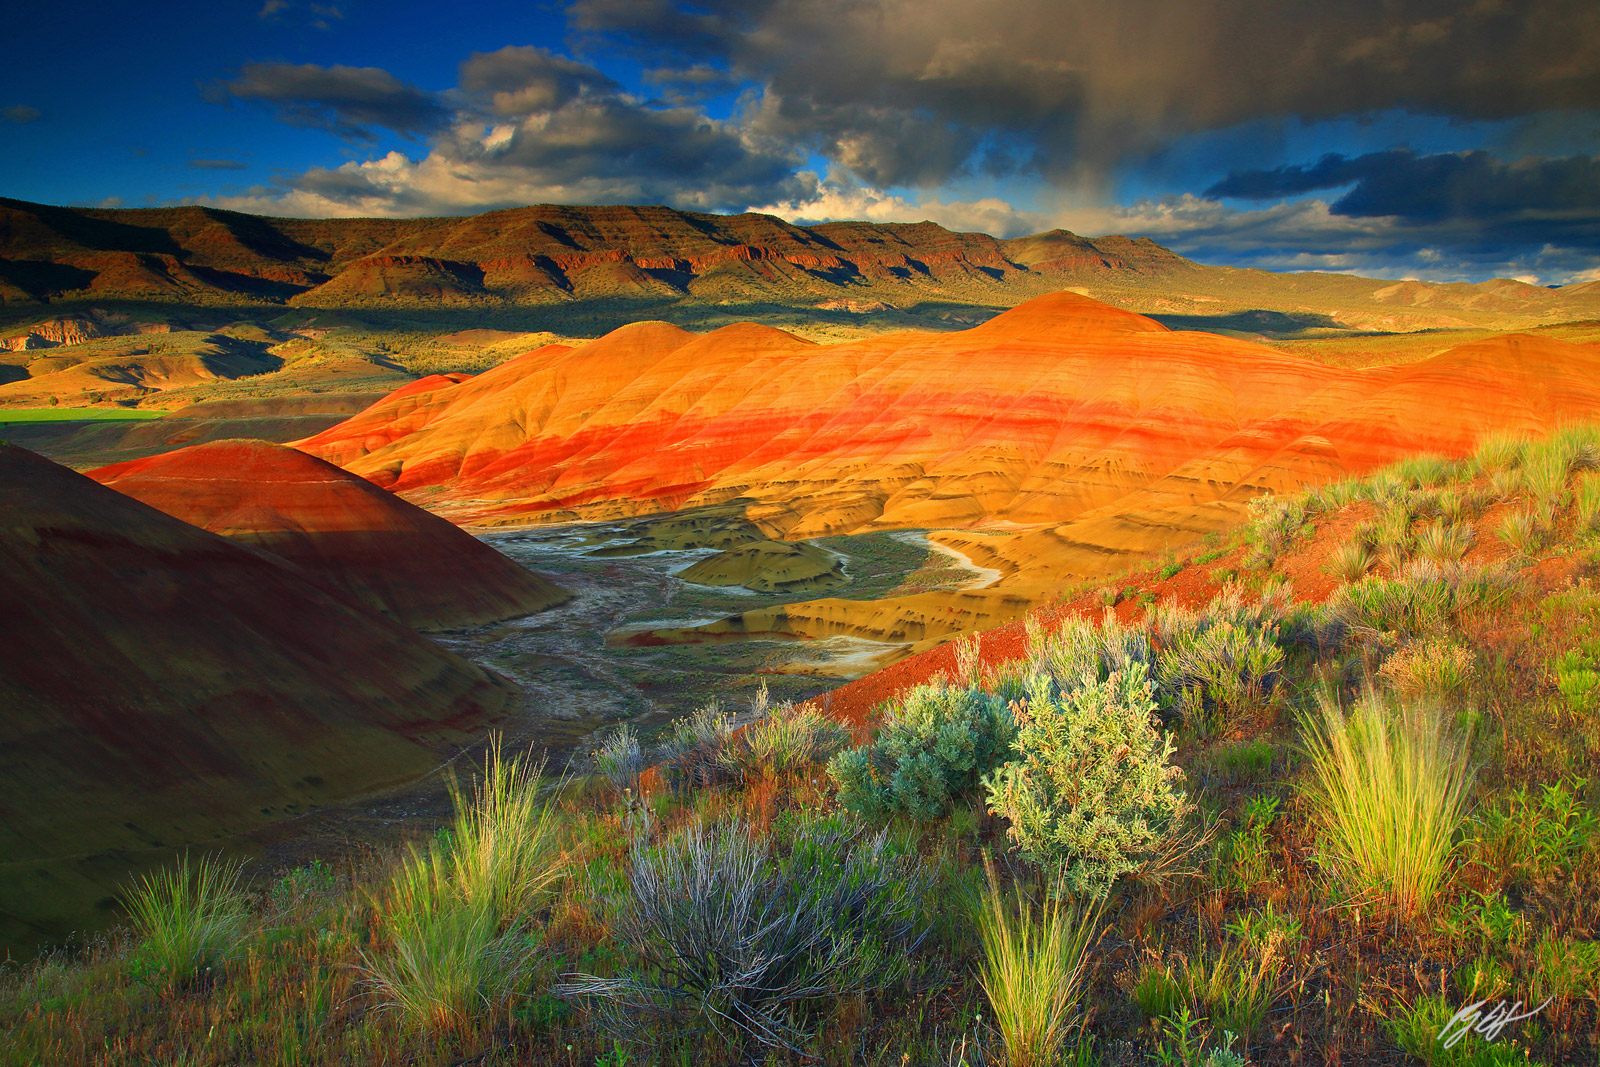 Sunset Painted Hills in the John Day Fossil Beds National Monument in Oregon